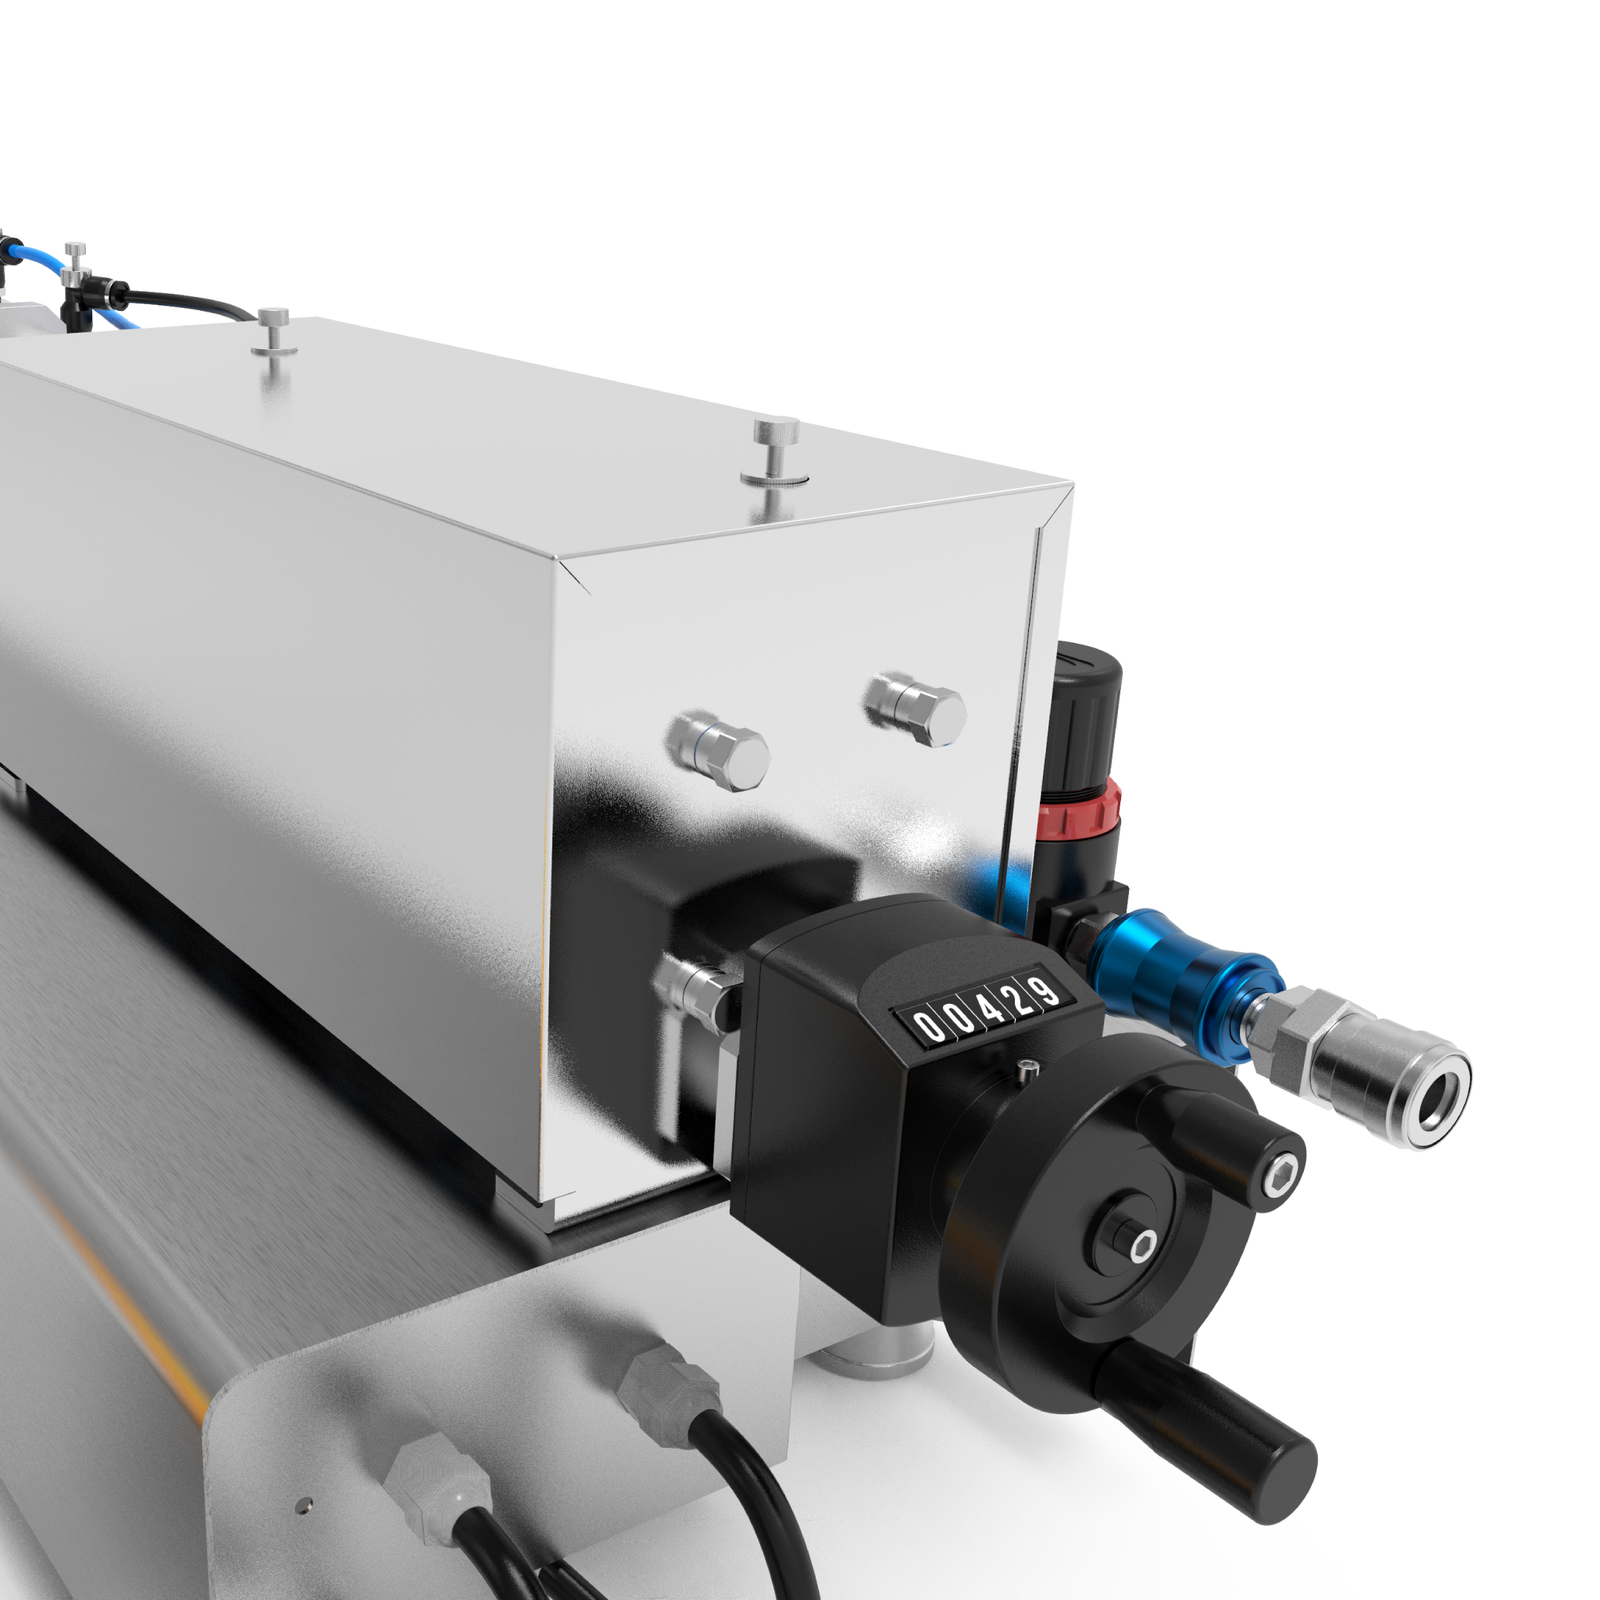 A high viscosity JORES TECHNOLOGIES® paste filling machine shown from the back. The fill volume adjuster and compressed air connector can be easily appreciated.